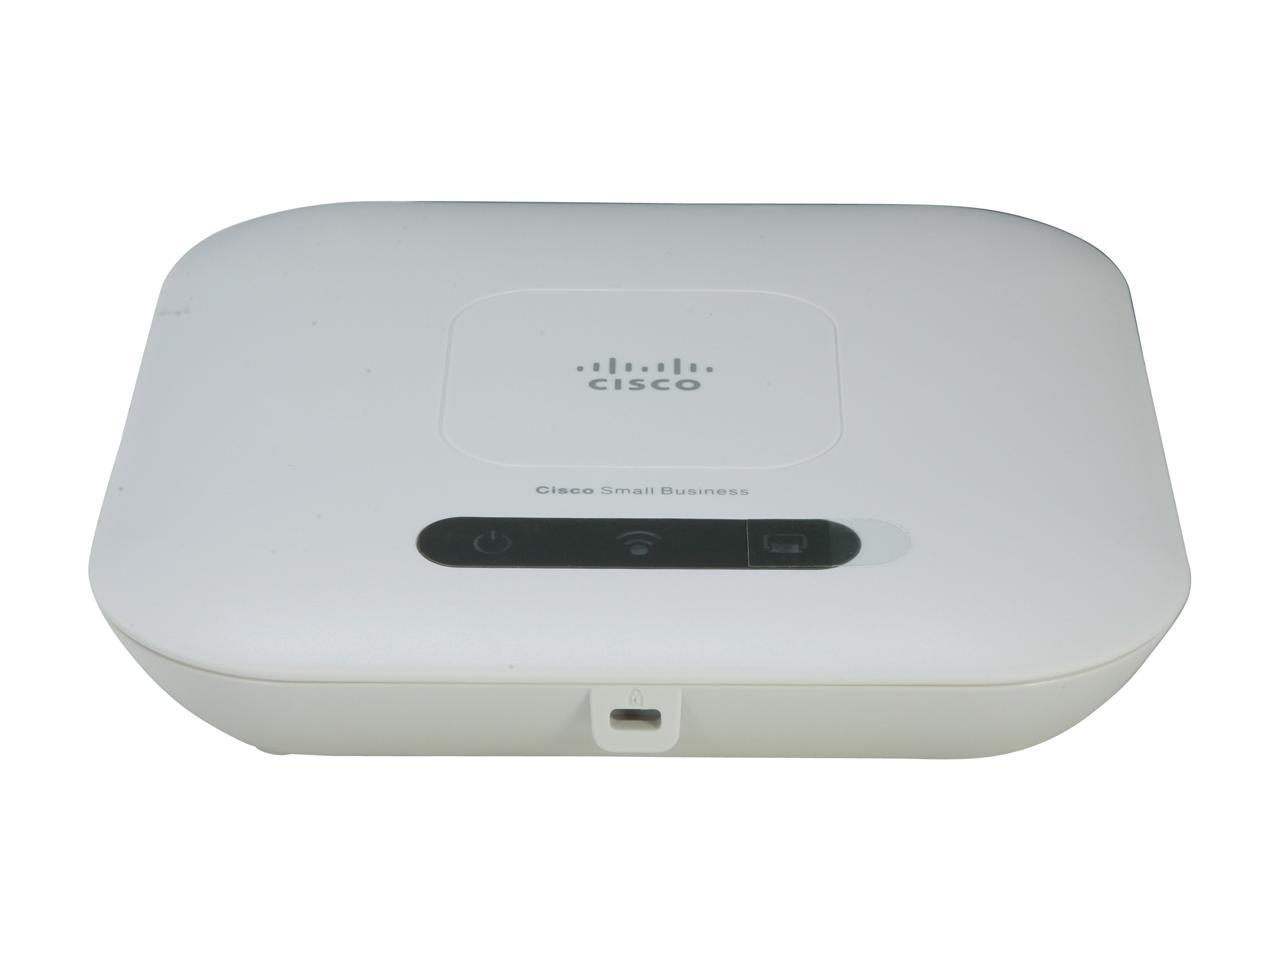 Cisco Small Business WAP321-A-K9 Wireless-N Selectable-Band Access Point w/ PoE and Gigabit Ethernet